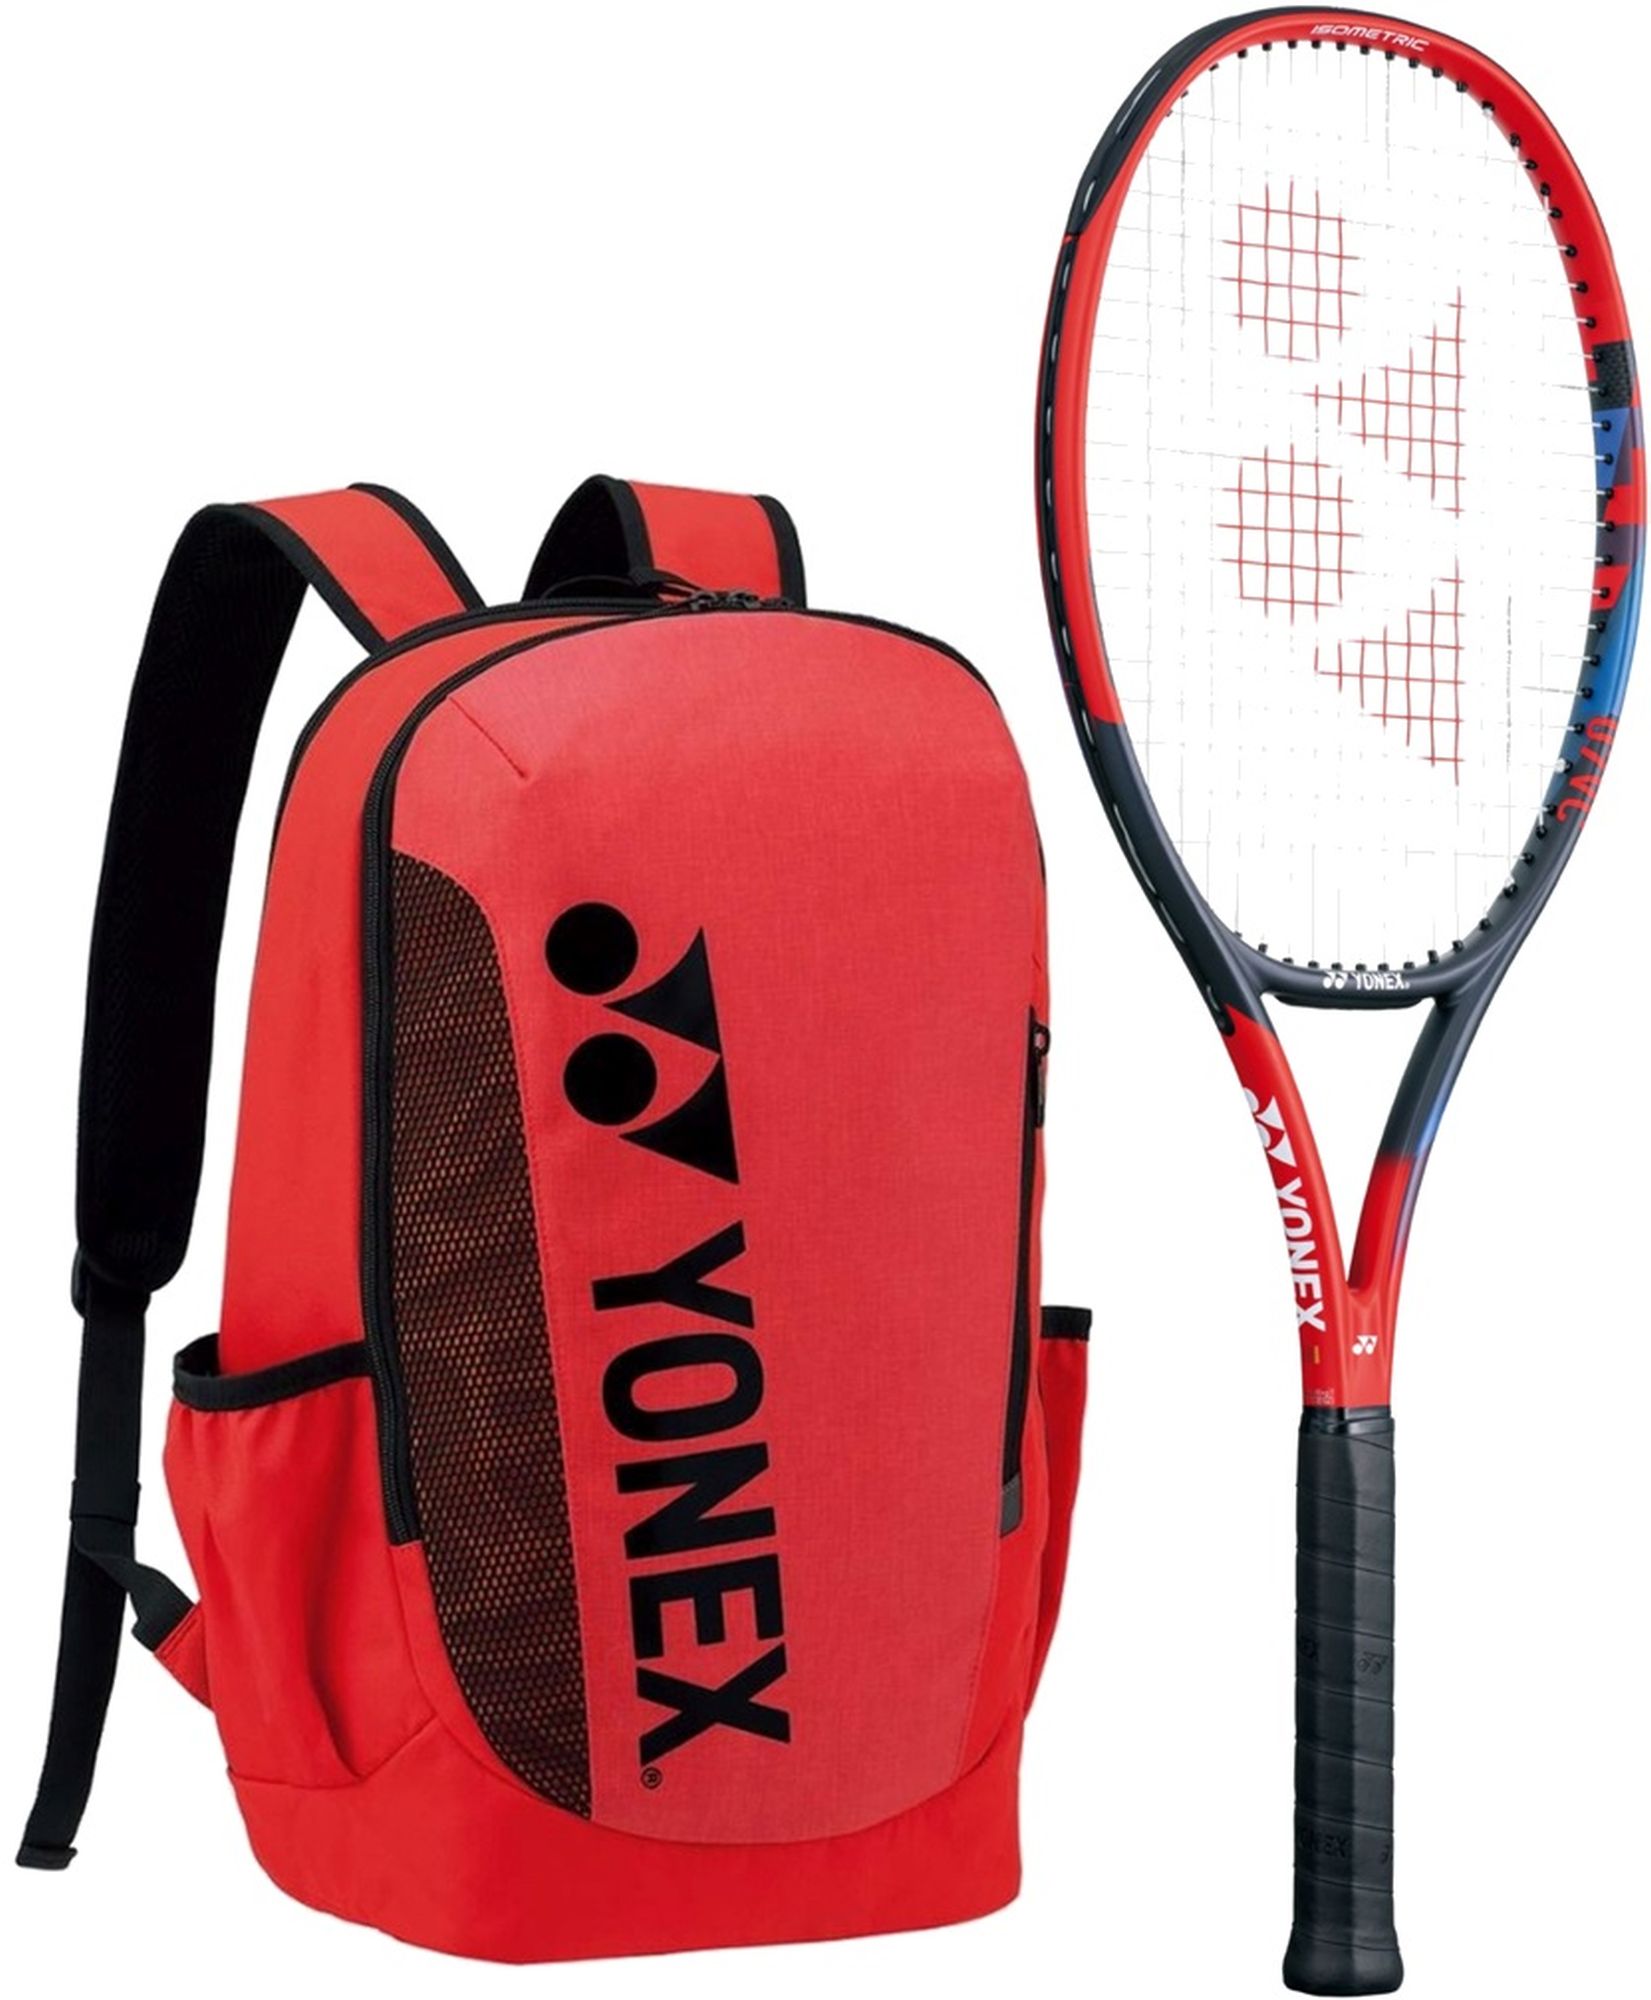 Tennis Bag Tennis Backpack - Tennis Bags for Women and Men to Hold Tennis  Racket,Pickleball Paddles, Badminton Racquet, Squash Racquet,Balls and  Other Accessories 